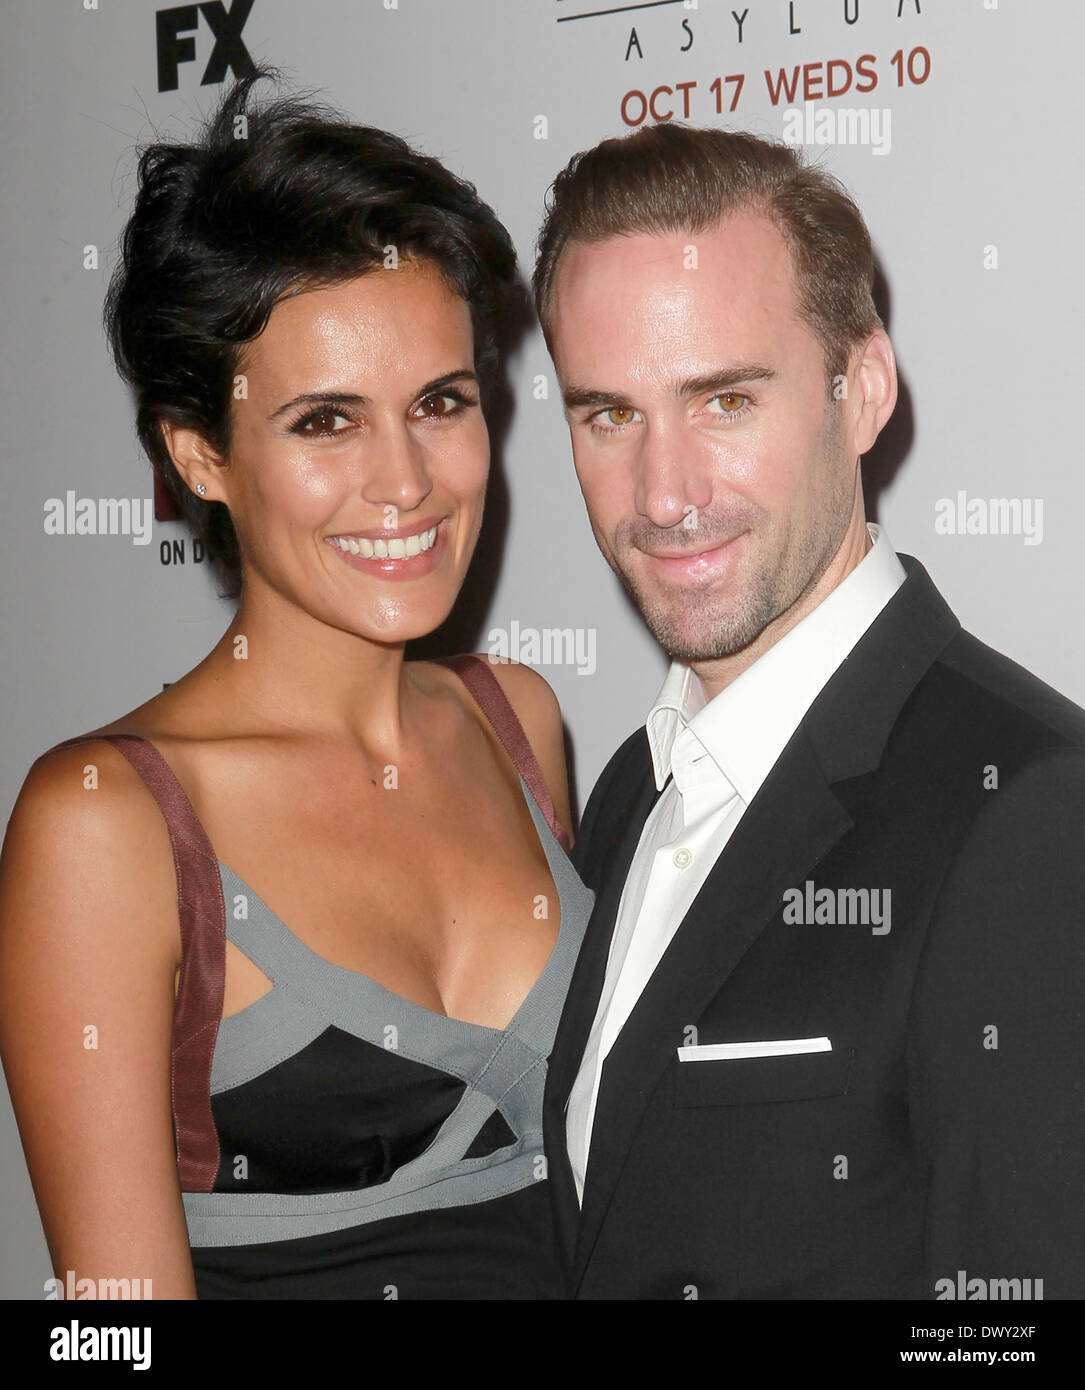 Joseph Fiennes; Maria Dolores Dieguez Premiere Screening of FX's 'American Horror Story: Asylum' at the Paramount Theatre Hollywood, California - 13.10.12 Featuring: Joseph Fiennes; Maria Dolores Dieguez Where: Hollywood, California, United States When: 1 Stock Photo